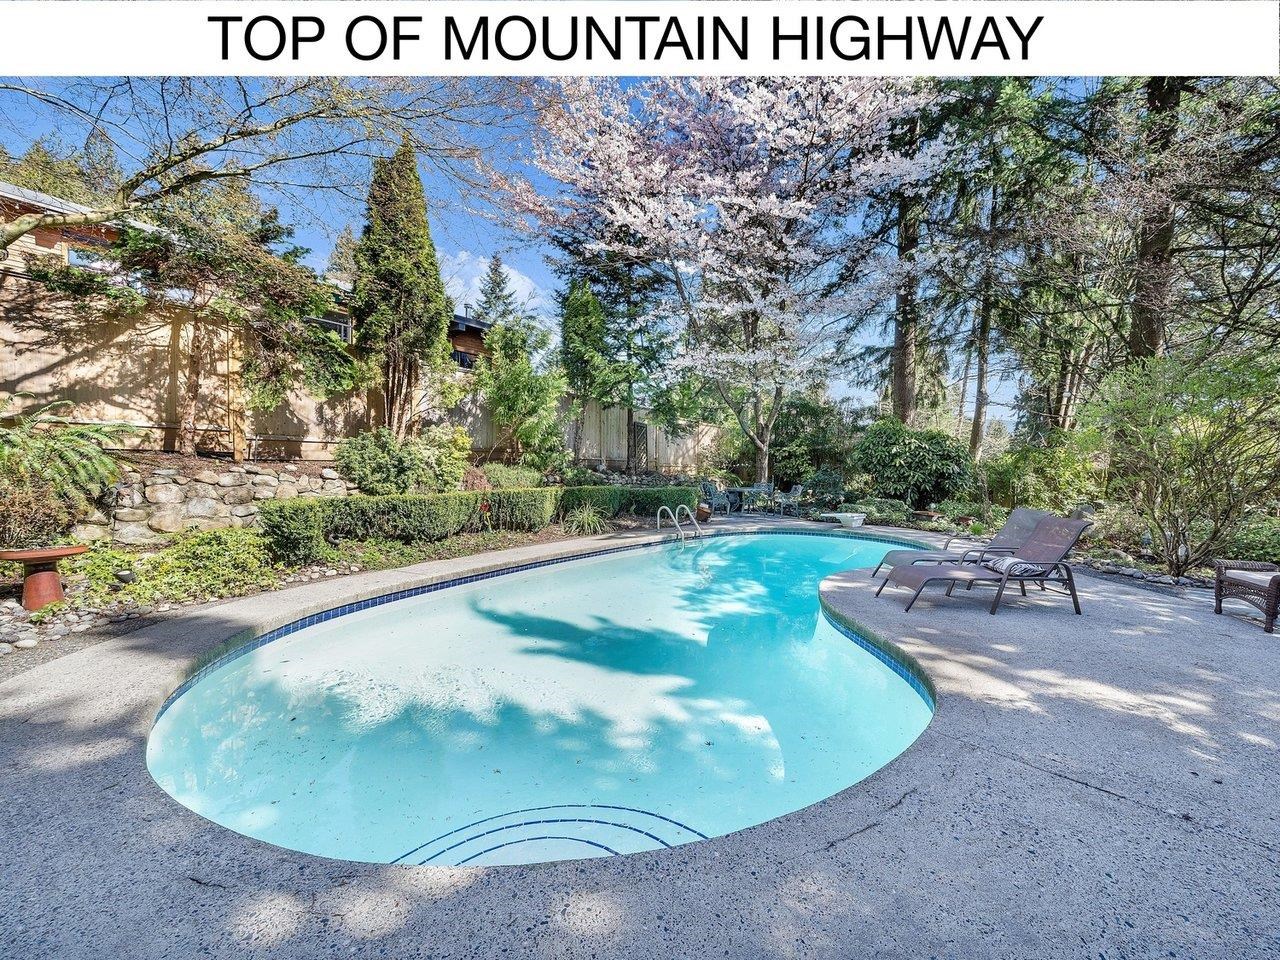 Listing image of 4422 MOUNTAIN HIGHWAY